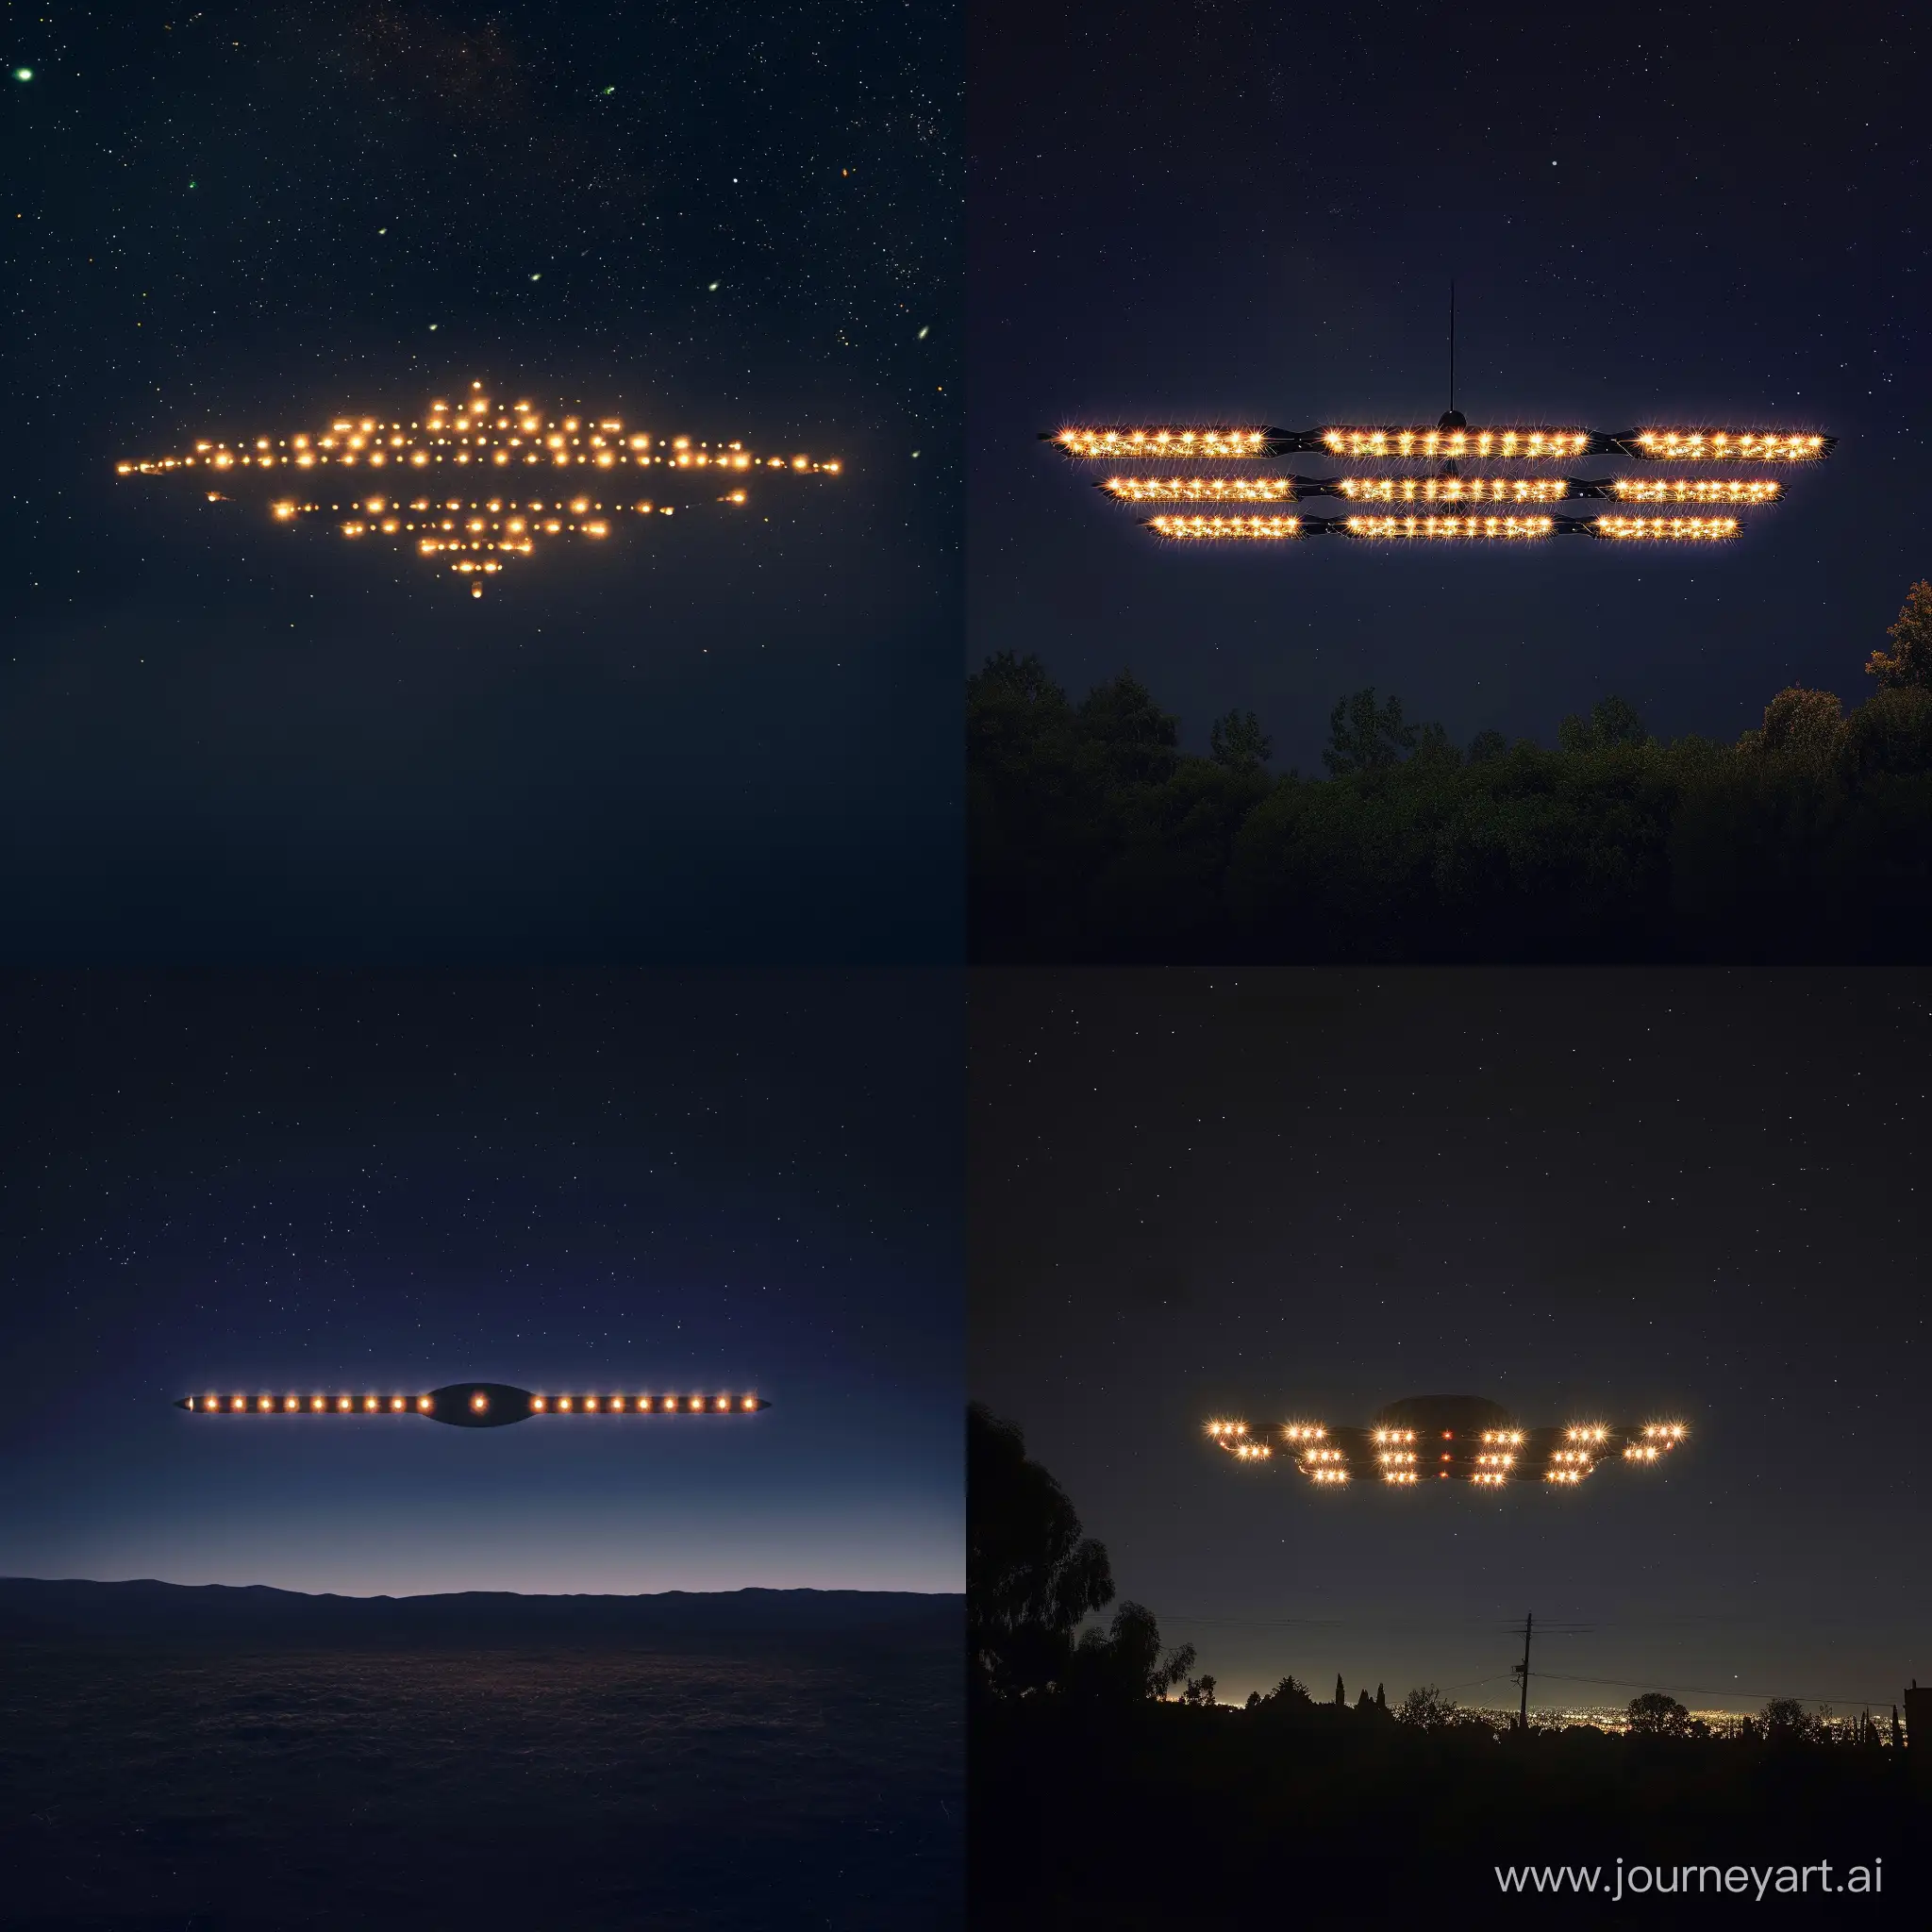 Mysterious-Night-Flight-Spectacular-Array-of-Forty-Lights